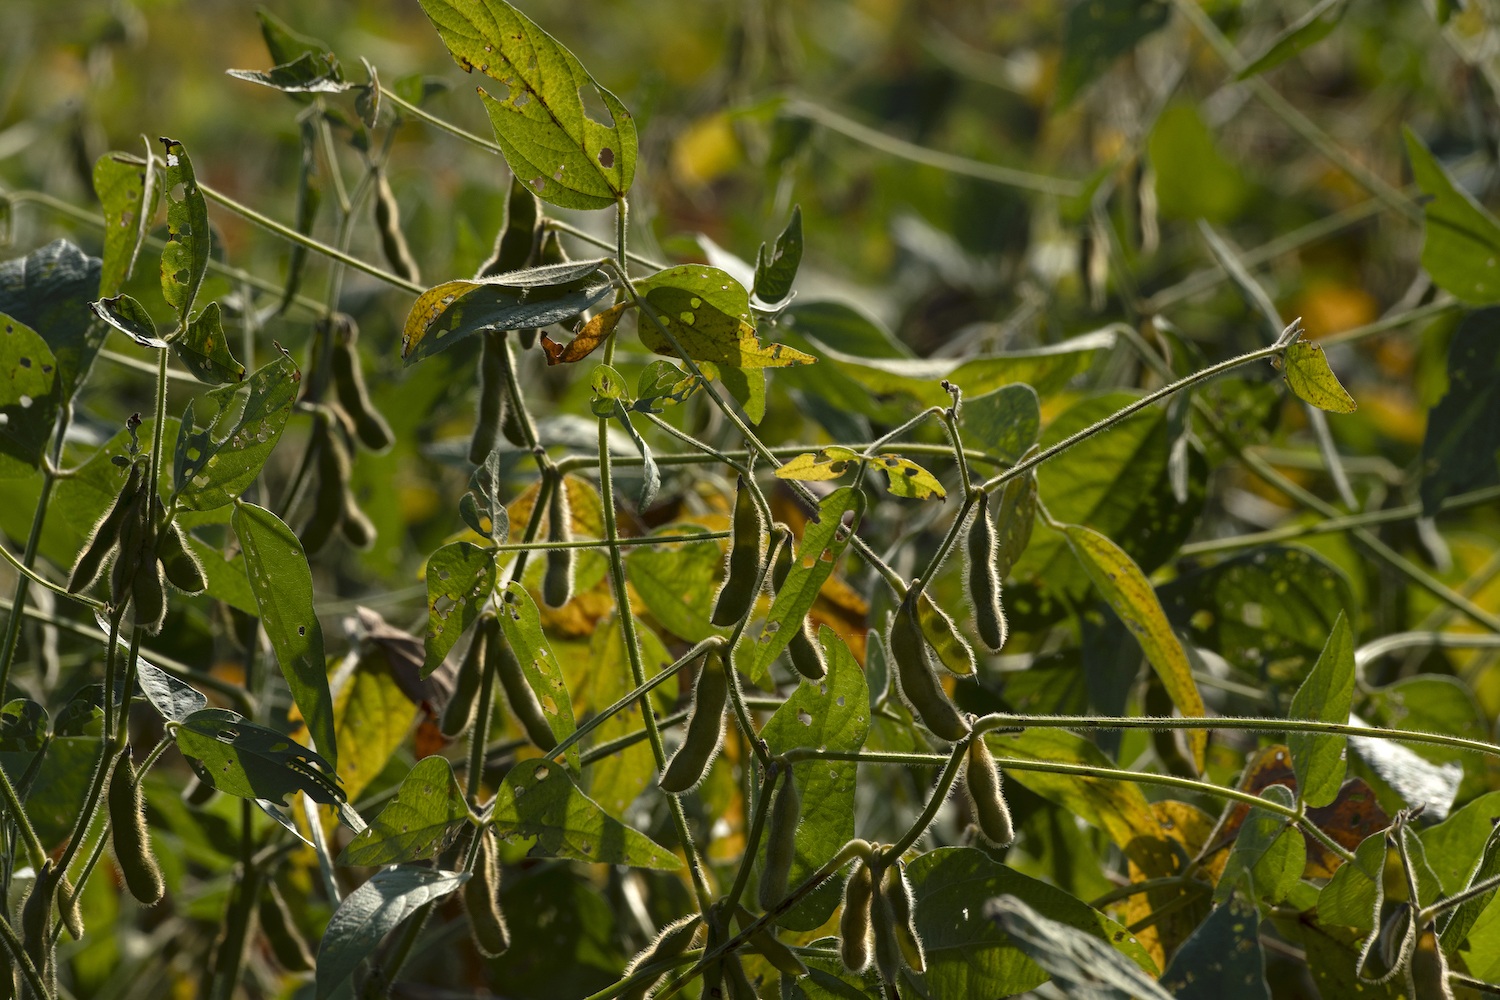 soybean farmers to spray pesticides linked to cancer April 2020